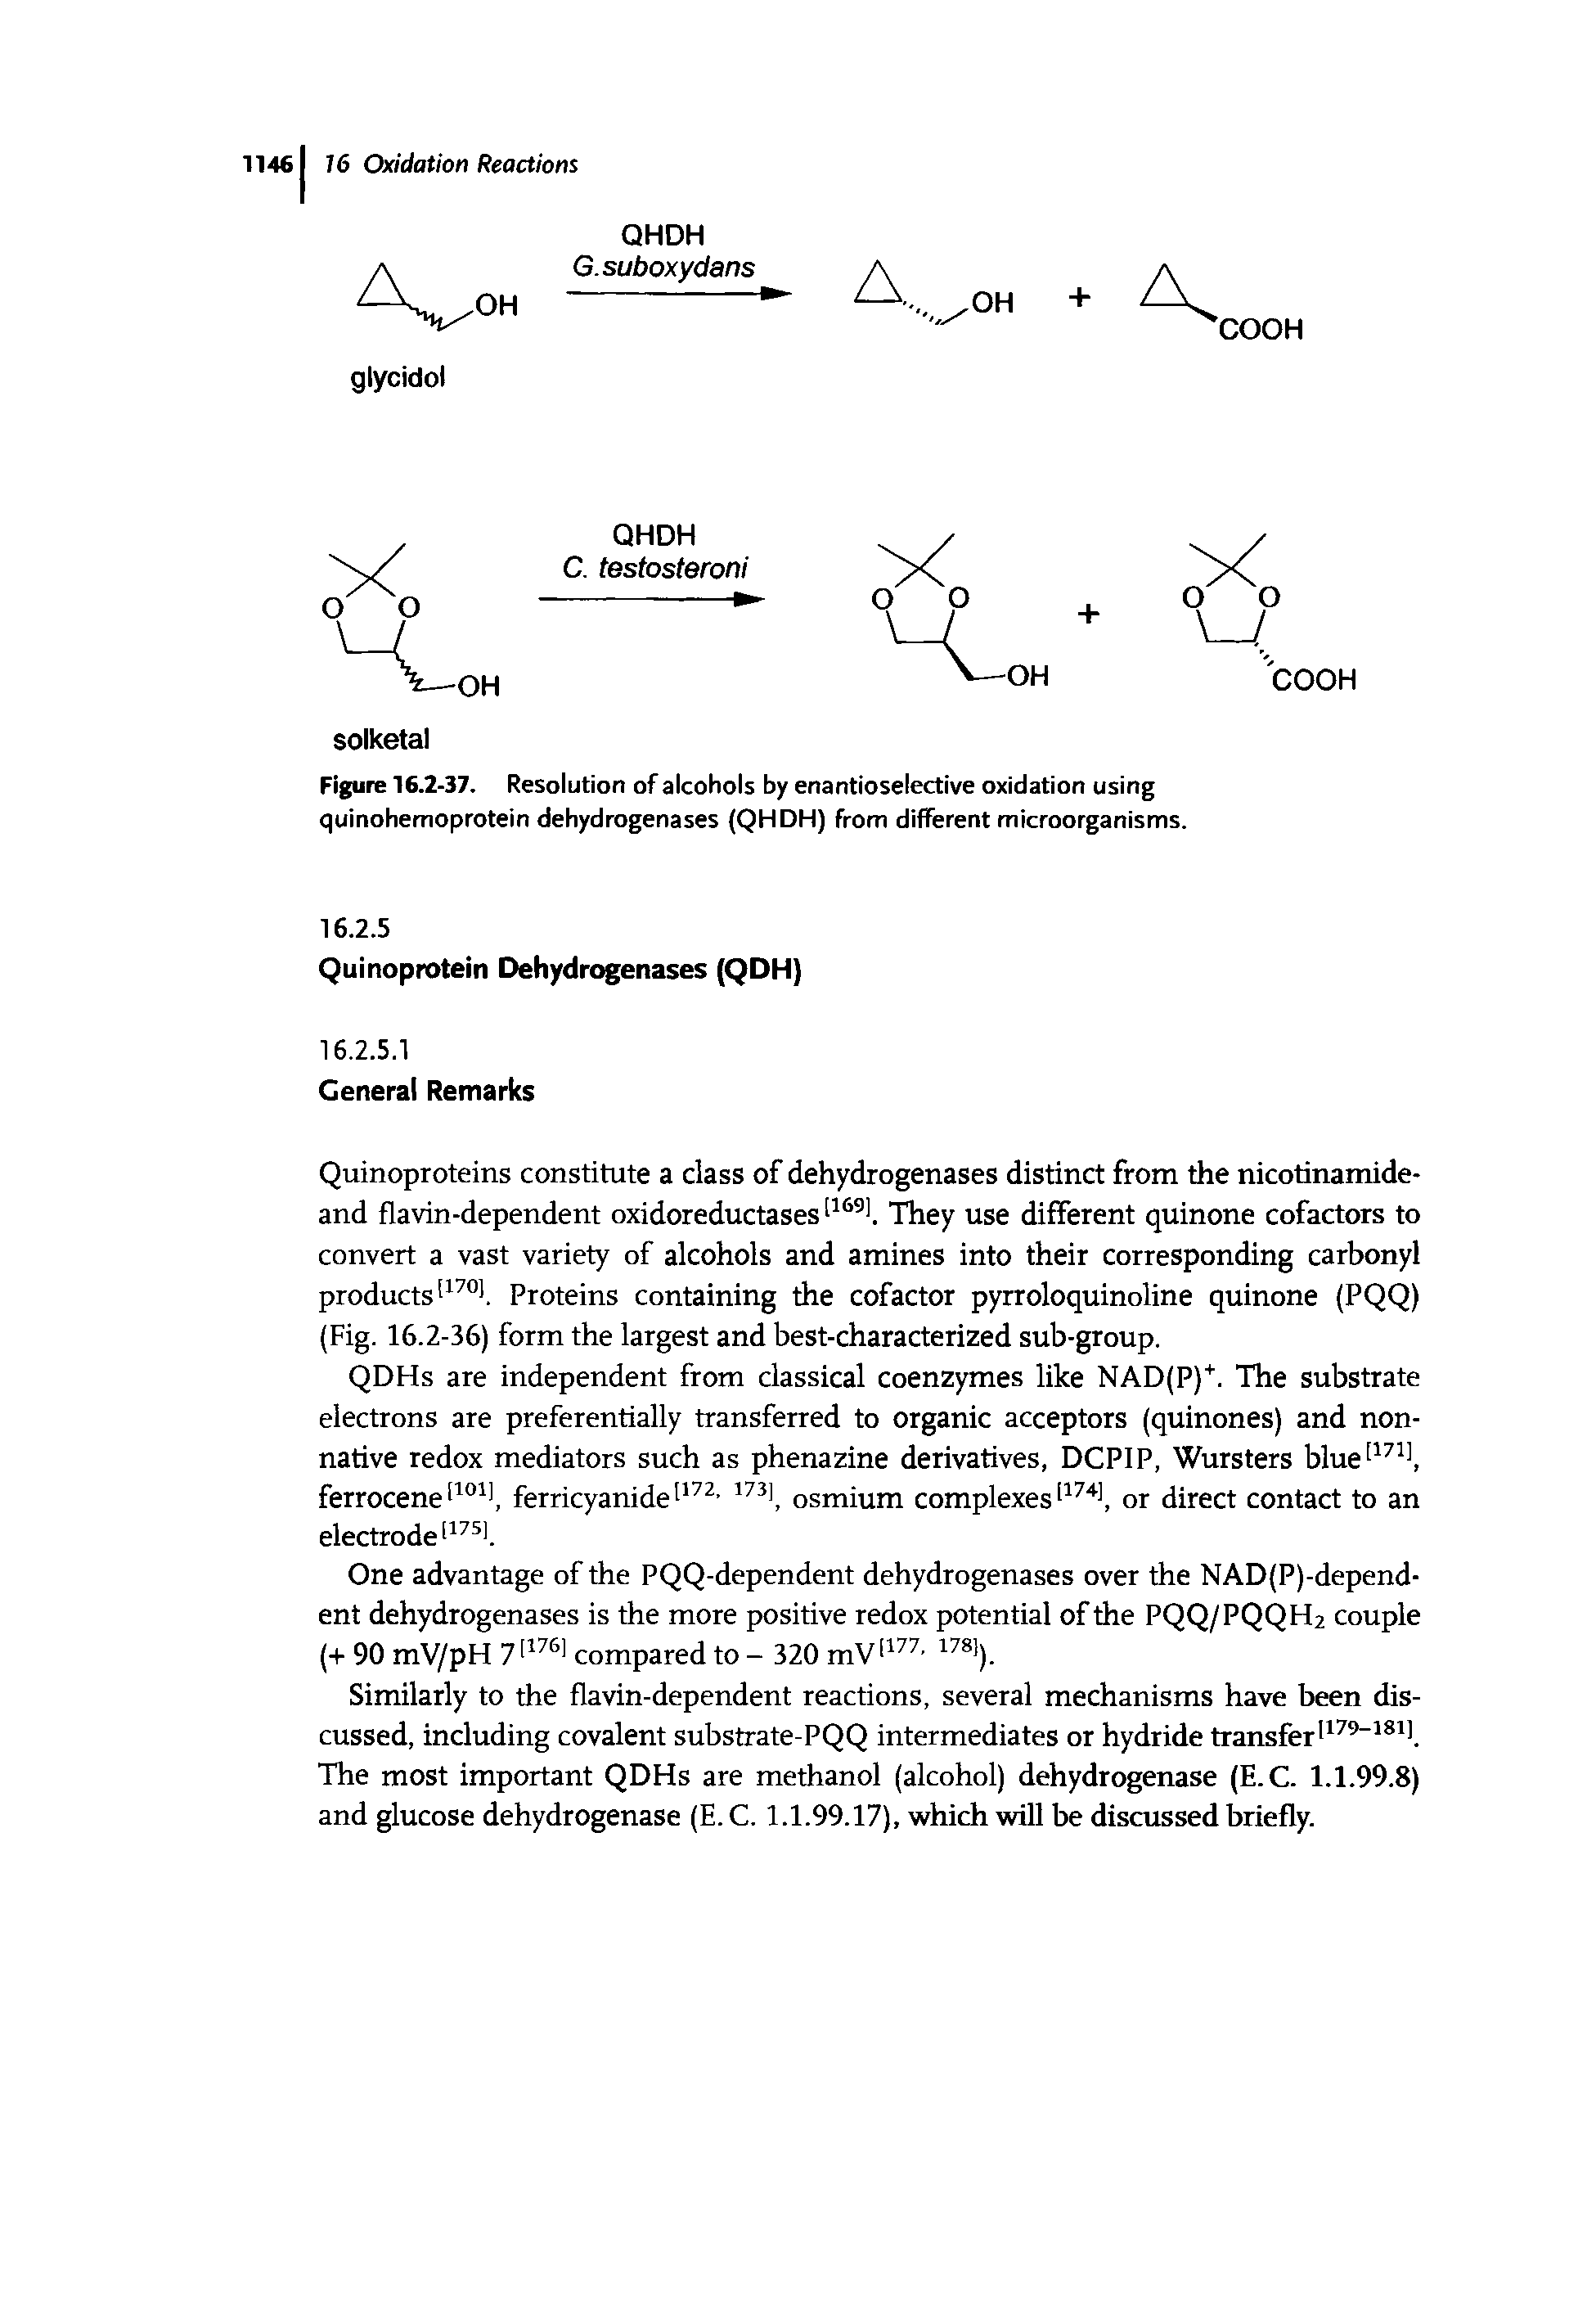 Figure 16.2-37. Resolution of alcohols by enantioselective oxidation using quinohemoprotein dehydrogenases (QHDH) from different microorganisms.